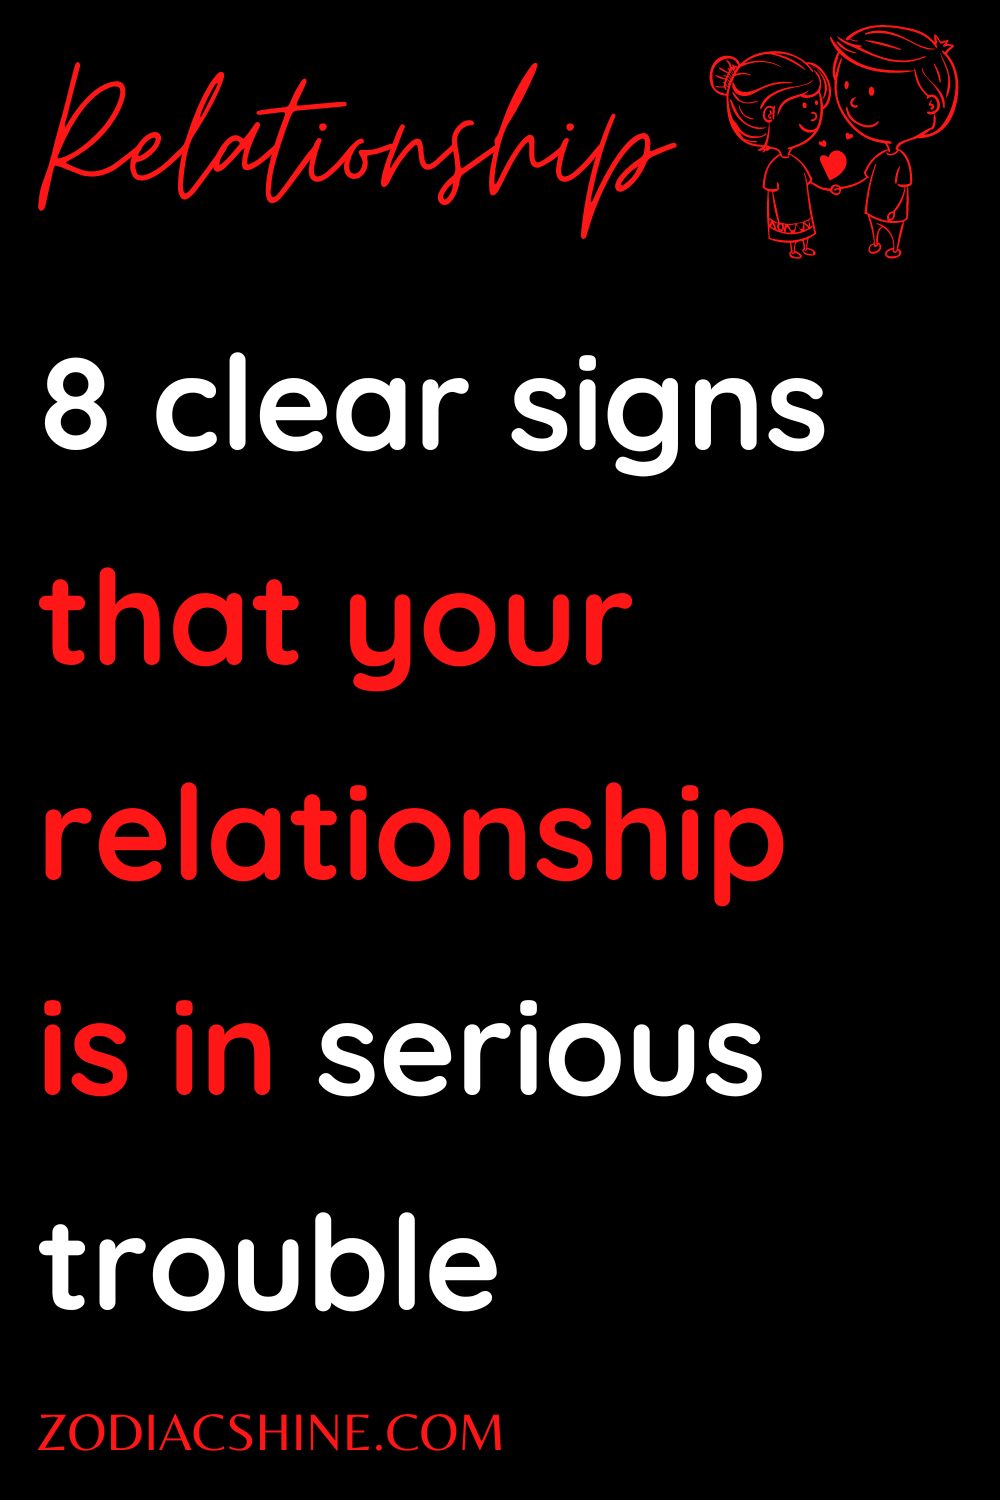 8 clear signs that your relationship is in serious trouble